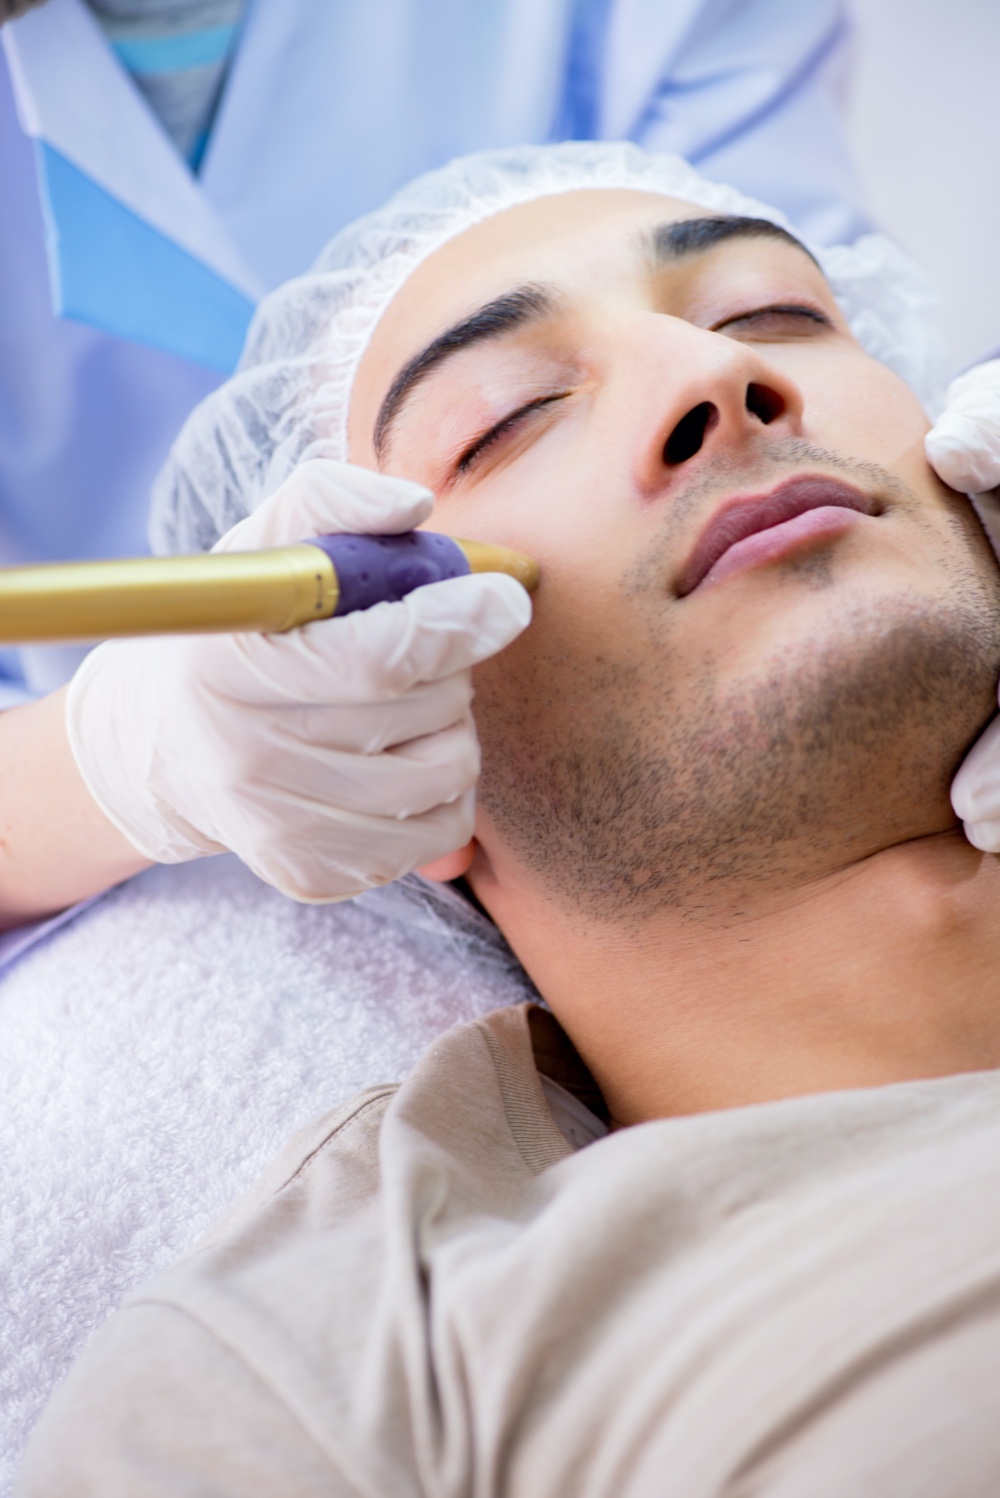 Radiofrequency Energy Treatment Man Face